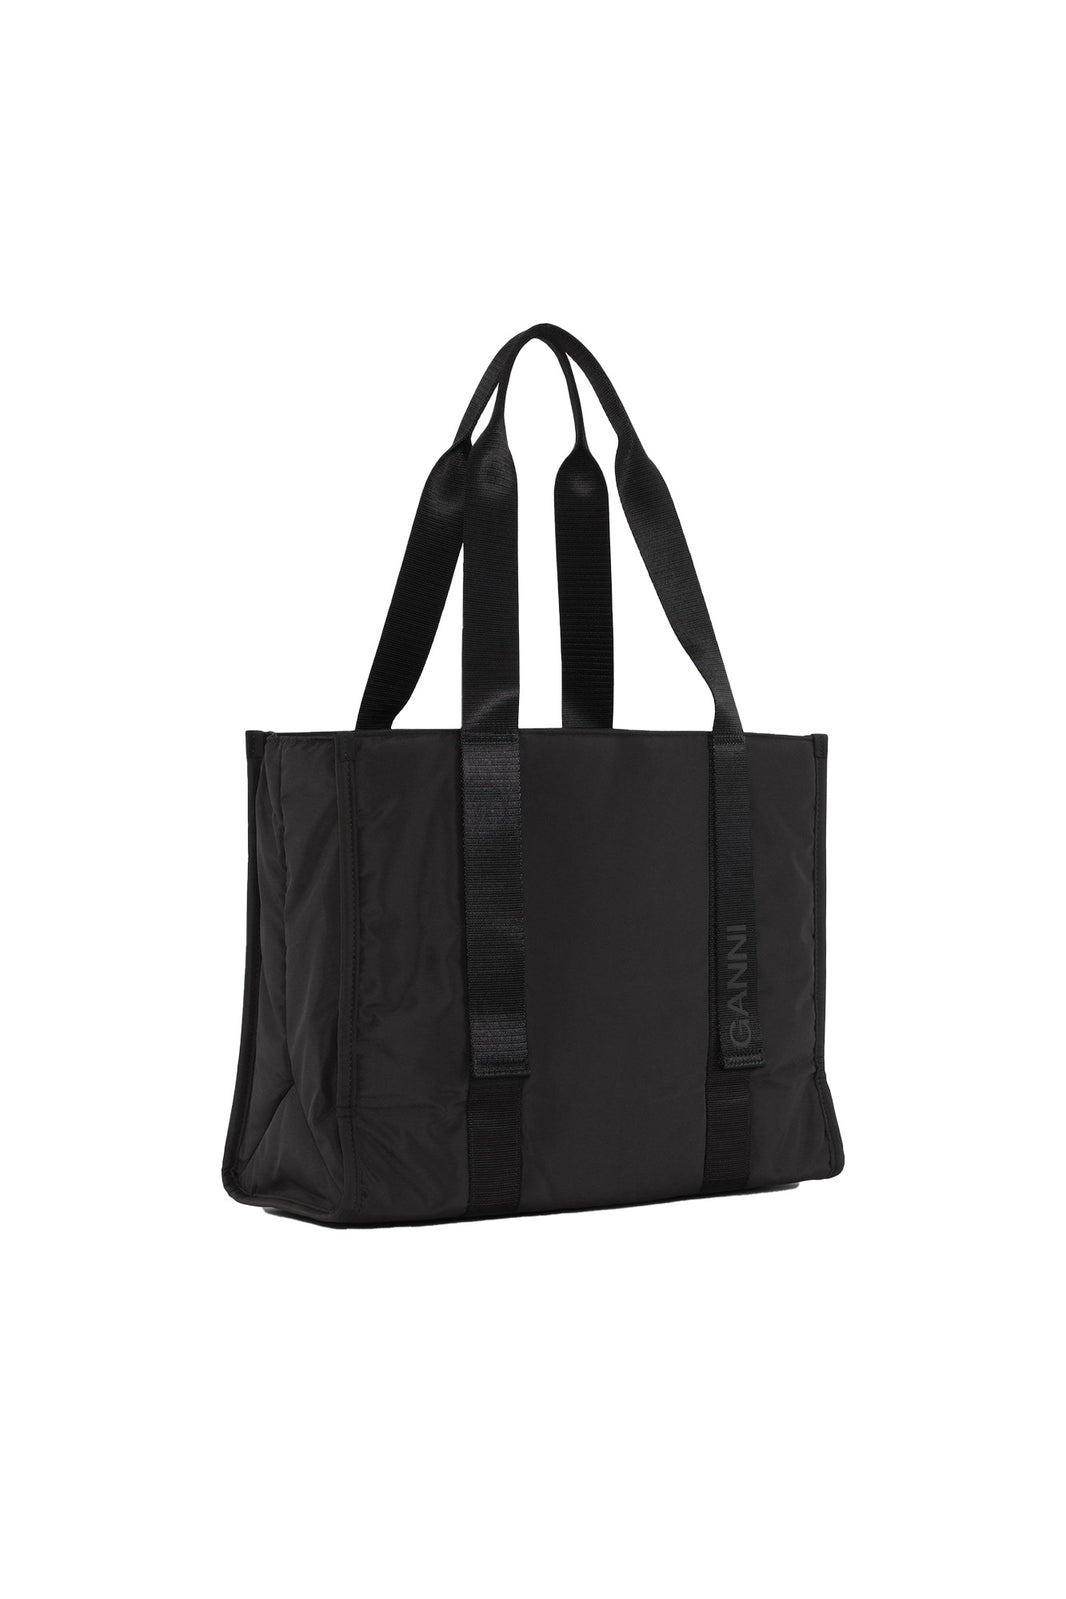 RECYCLED TECH MEDIUM TOTE